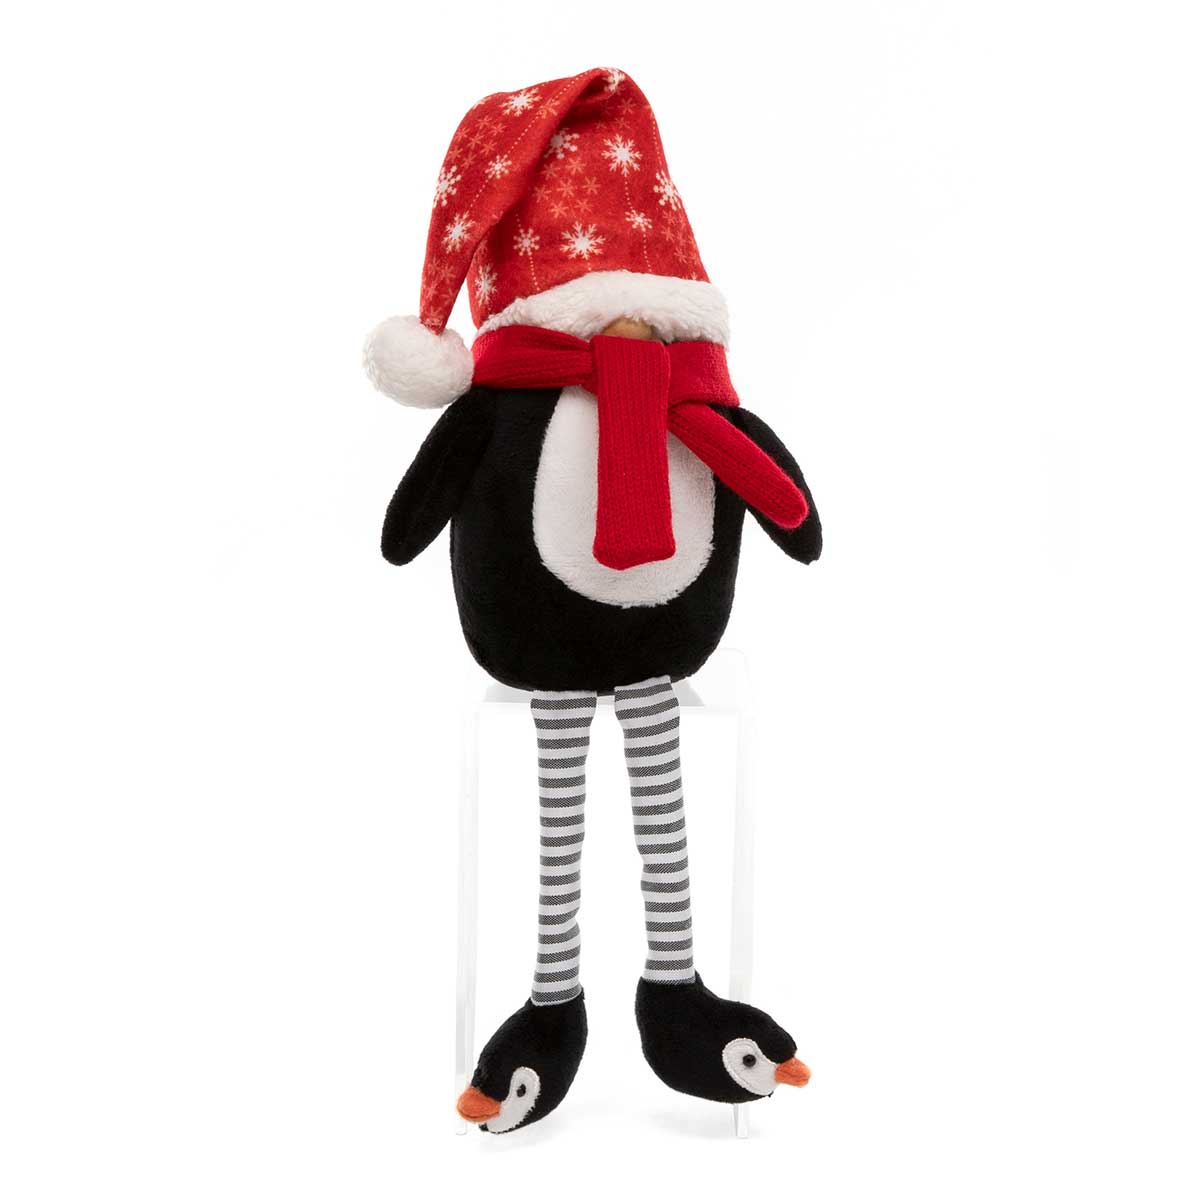 PENGUIN GNOME WITH RED/WHITE WITH FLOPPY LEGS 20"